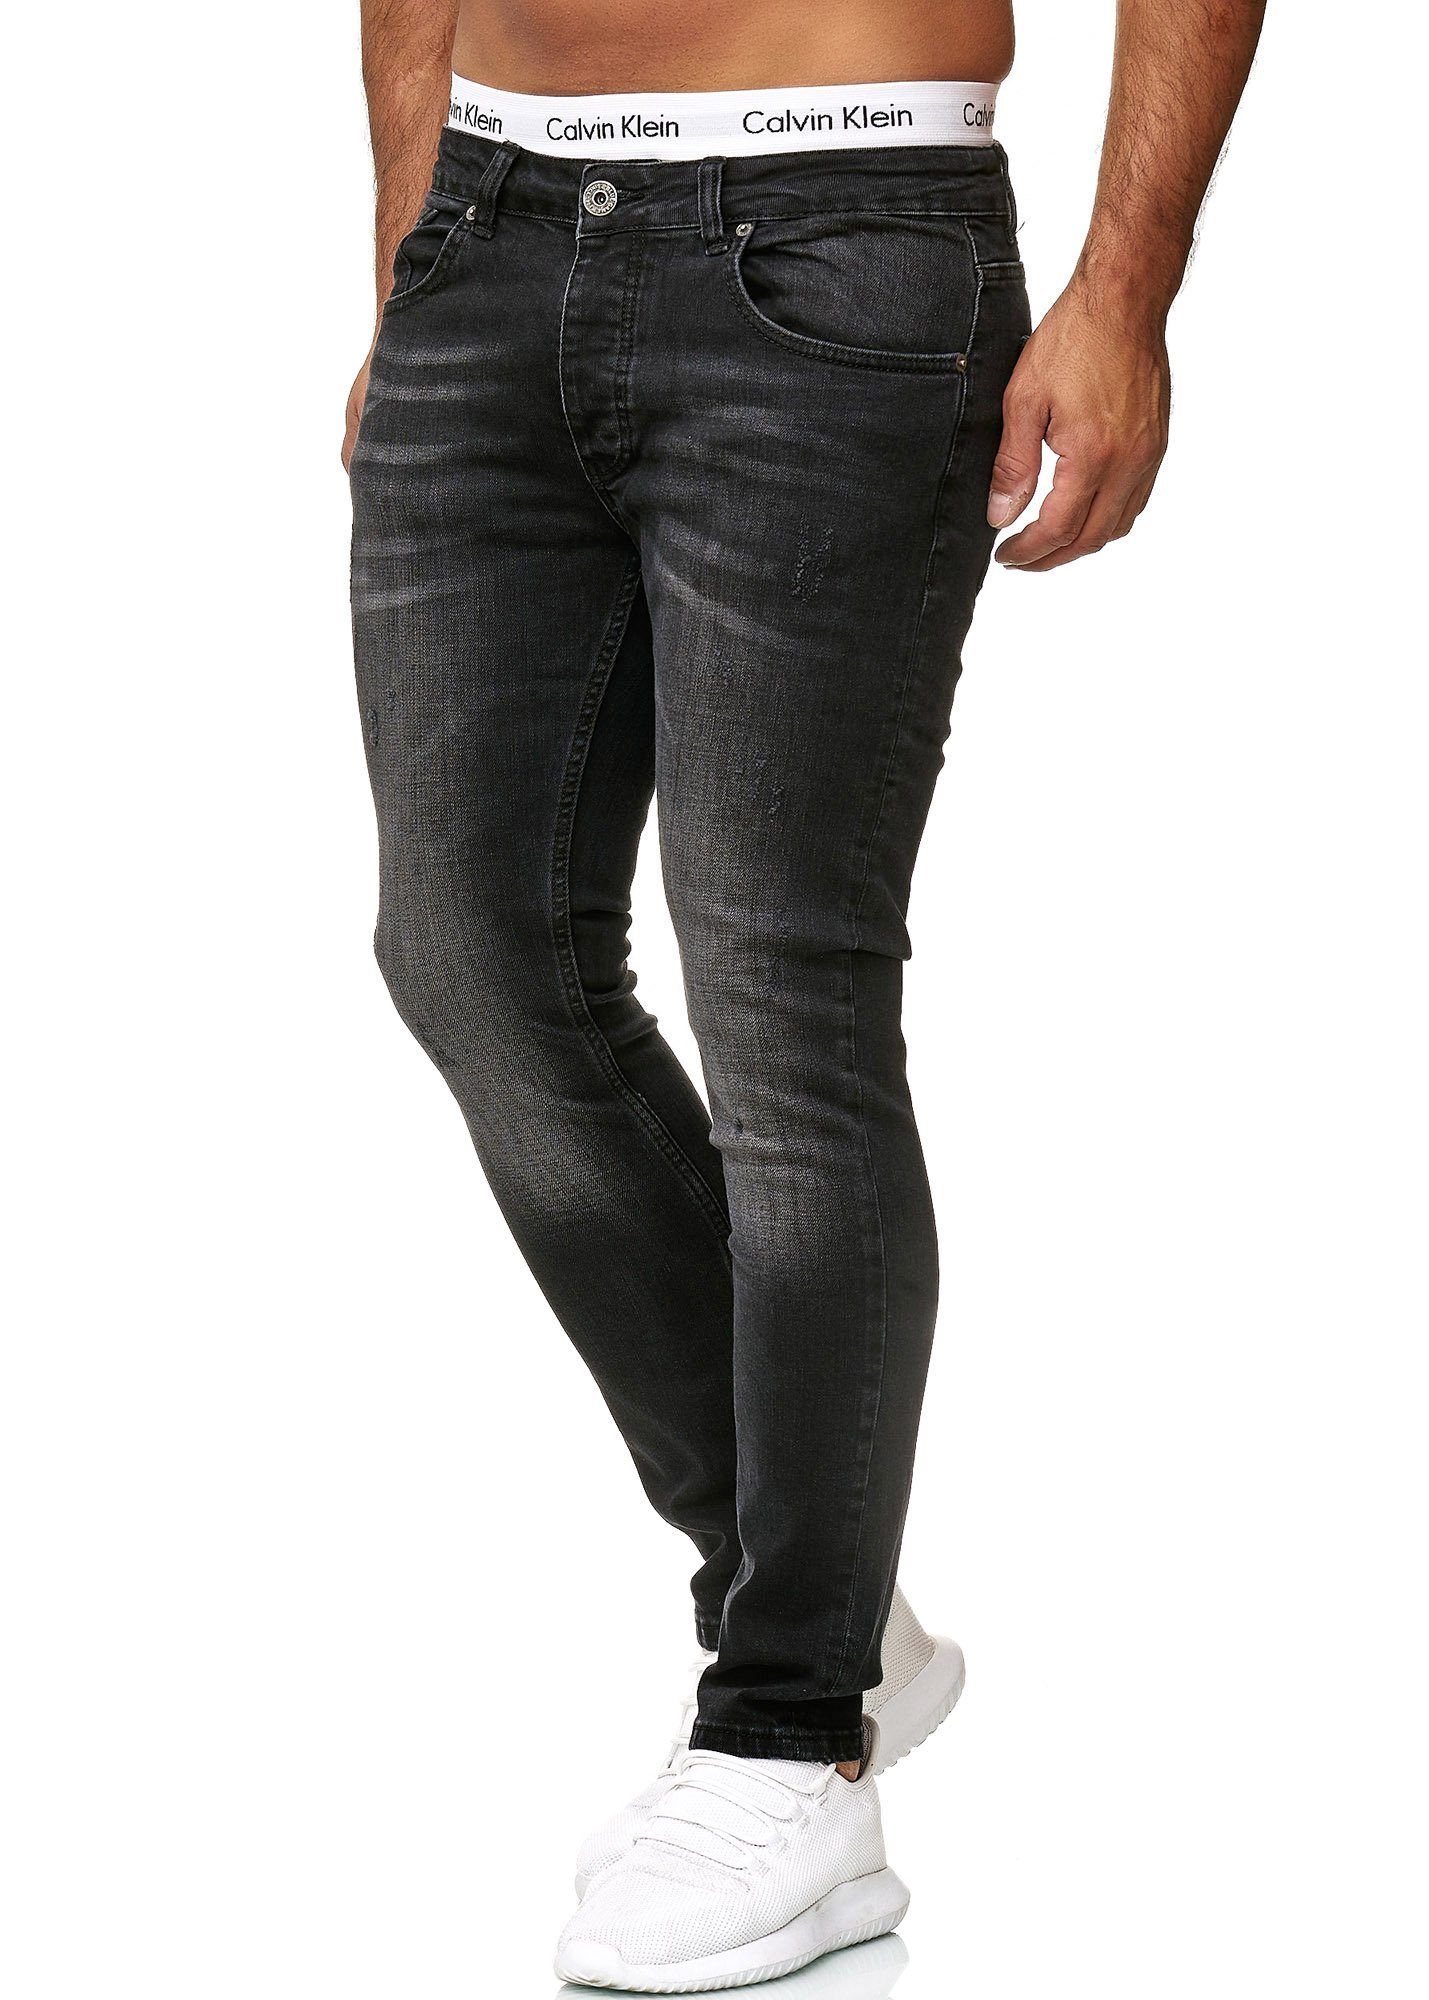 Casual Freizeit 600JS Straight-Jeans Used Black Dirty Designerjeans Business Bootcut, 604 (Jeanshose 1-tlg) OneRedox